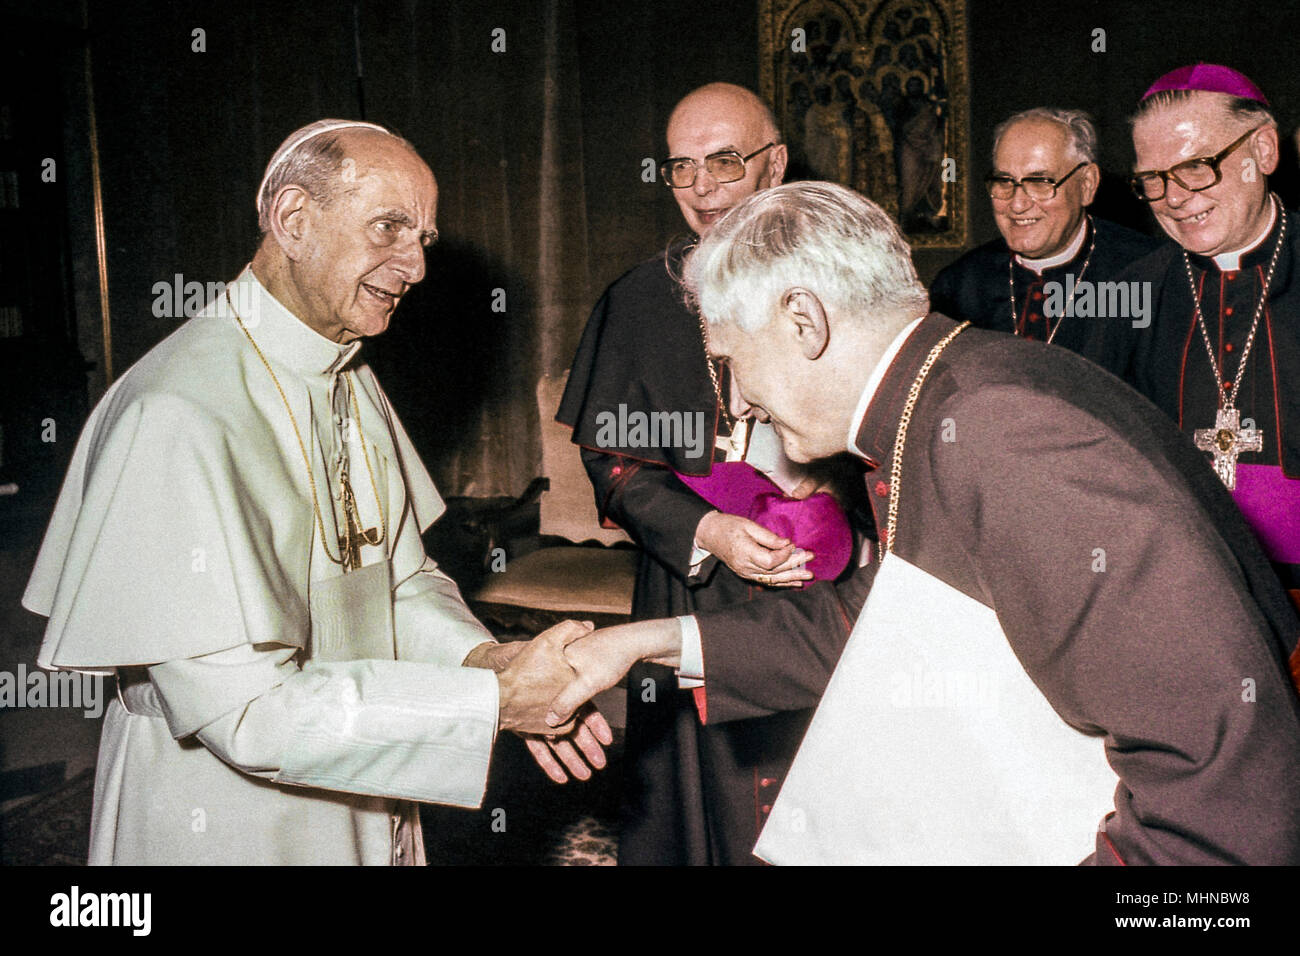 [Obrazek: pope-paolo-vi-and-cardinal-ratzinger-13-...MHNBW8.jpg]